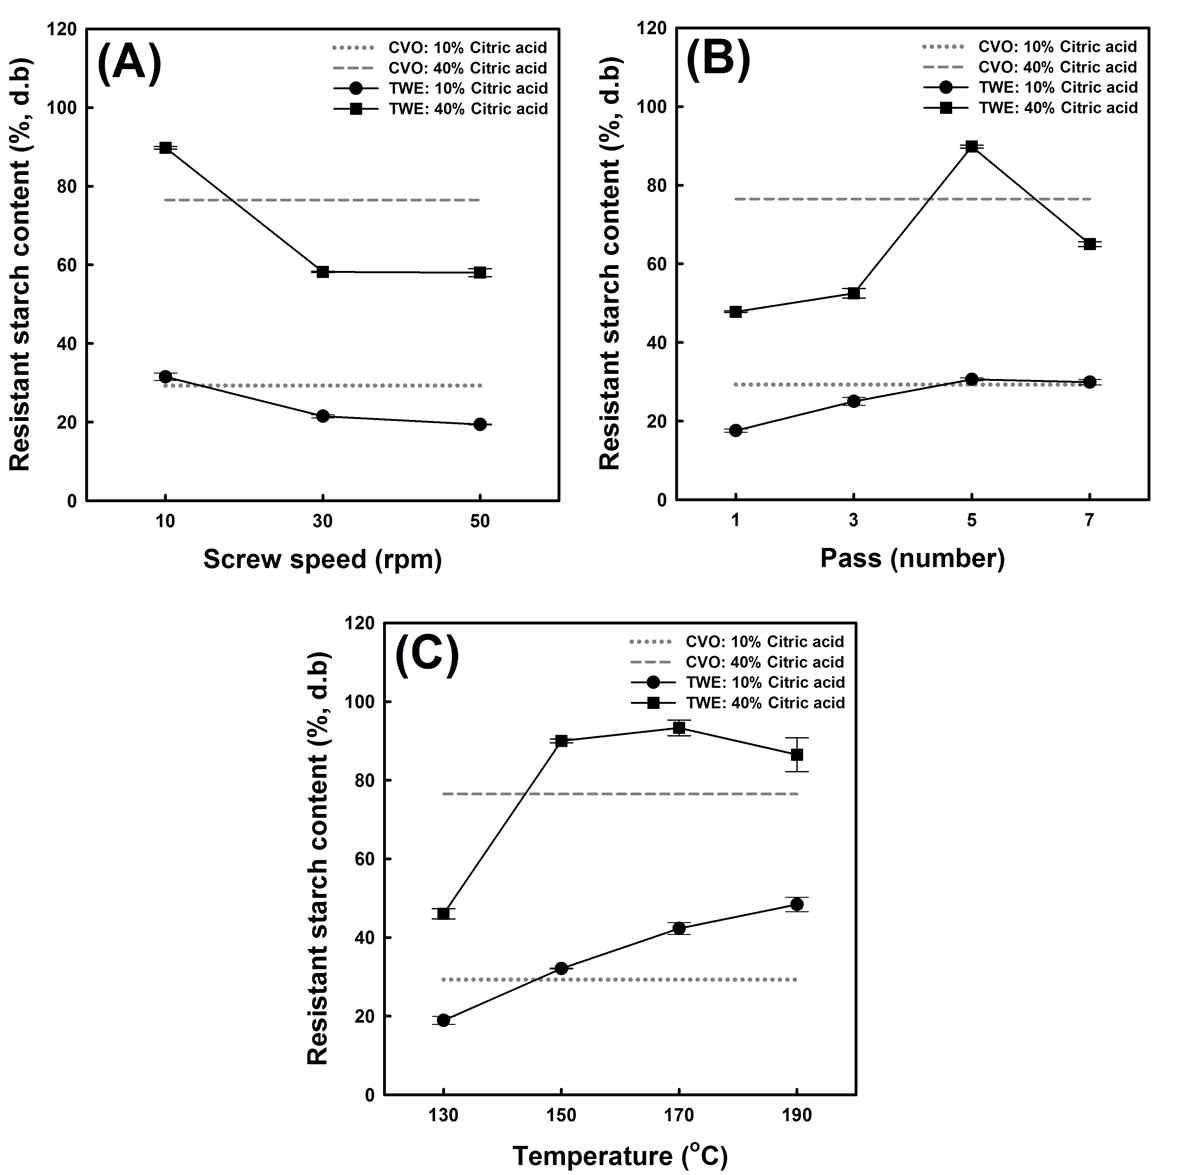 Effects of screw speed (A), passage (B), and temperature (C) on resistant starch contents of starch citrates prepared with different concentrations (10 and 40%) of anhydrous citric acid using a convection oven (CVO) and twin-screw extruder (TWE). Except for the mentioned parameter, other conditions were identical: (A) 150oC, and 5 passes, (B) 150oC, and 10 rpm, and (C) 10 rpm and 5 passes.